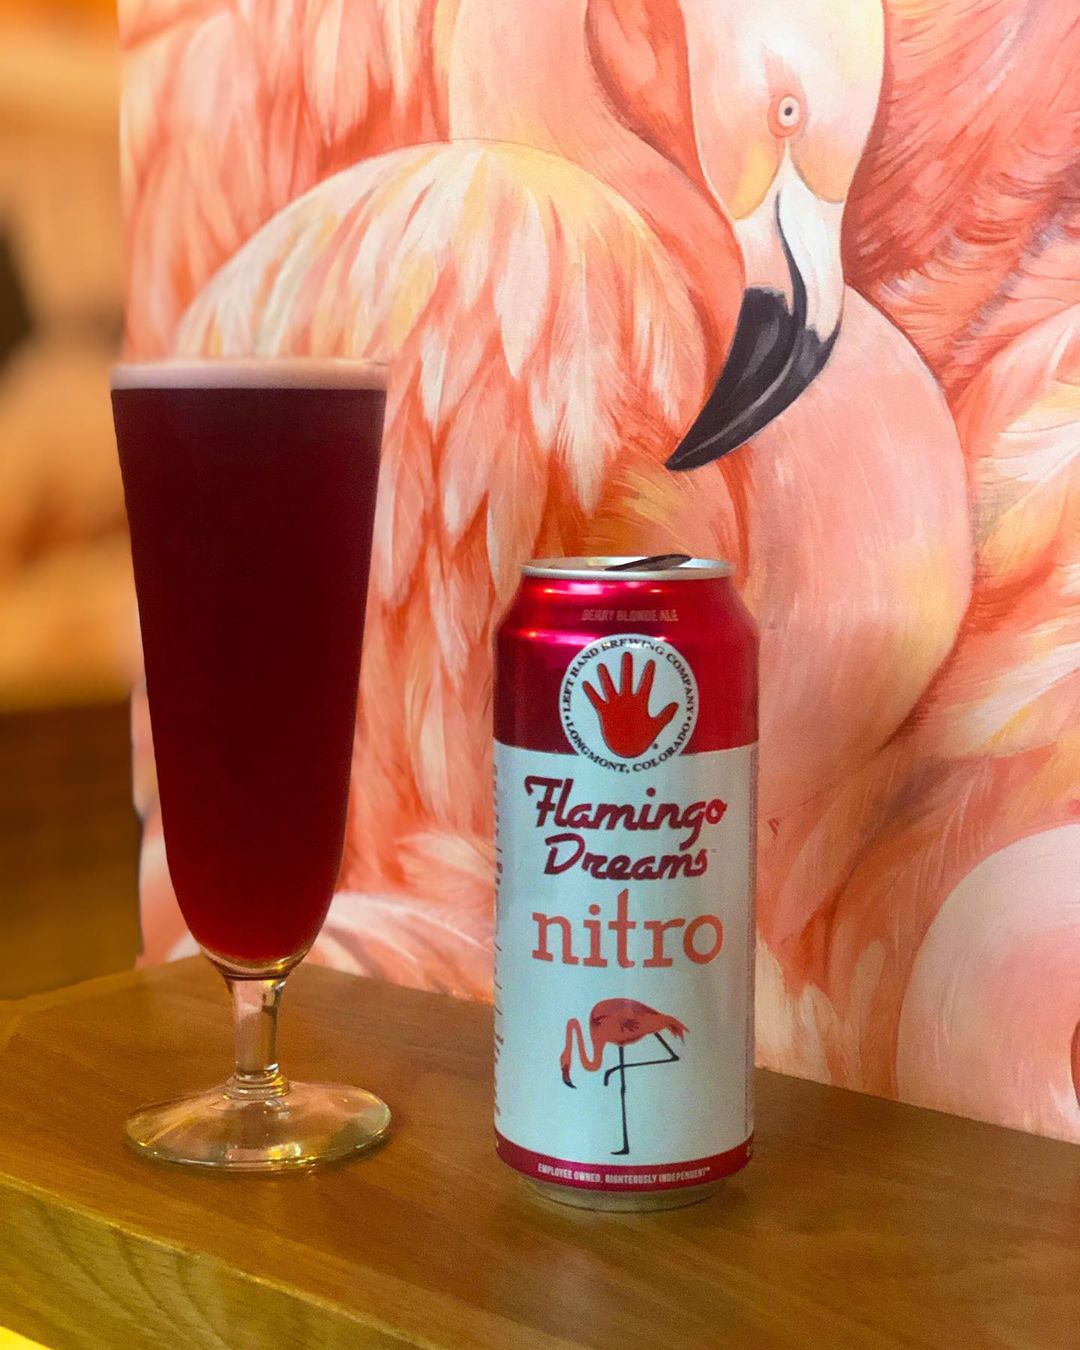 A Flamingo Dreams beer can sits in front of flamingo wallpaper